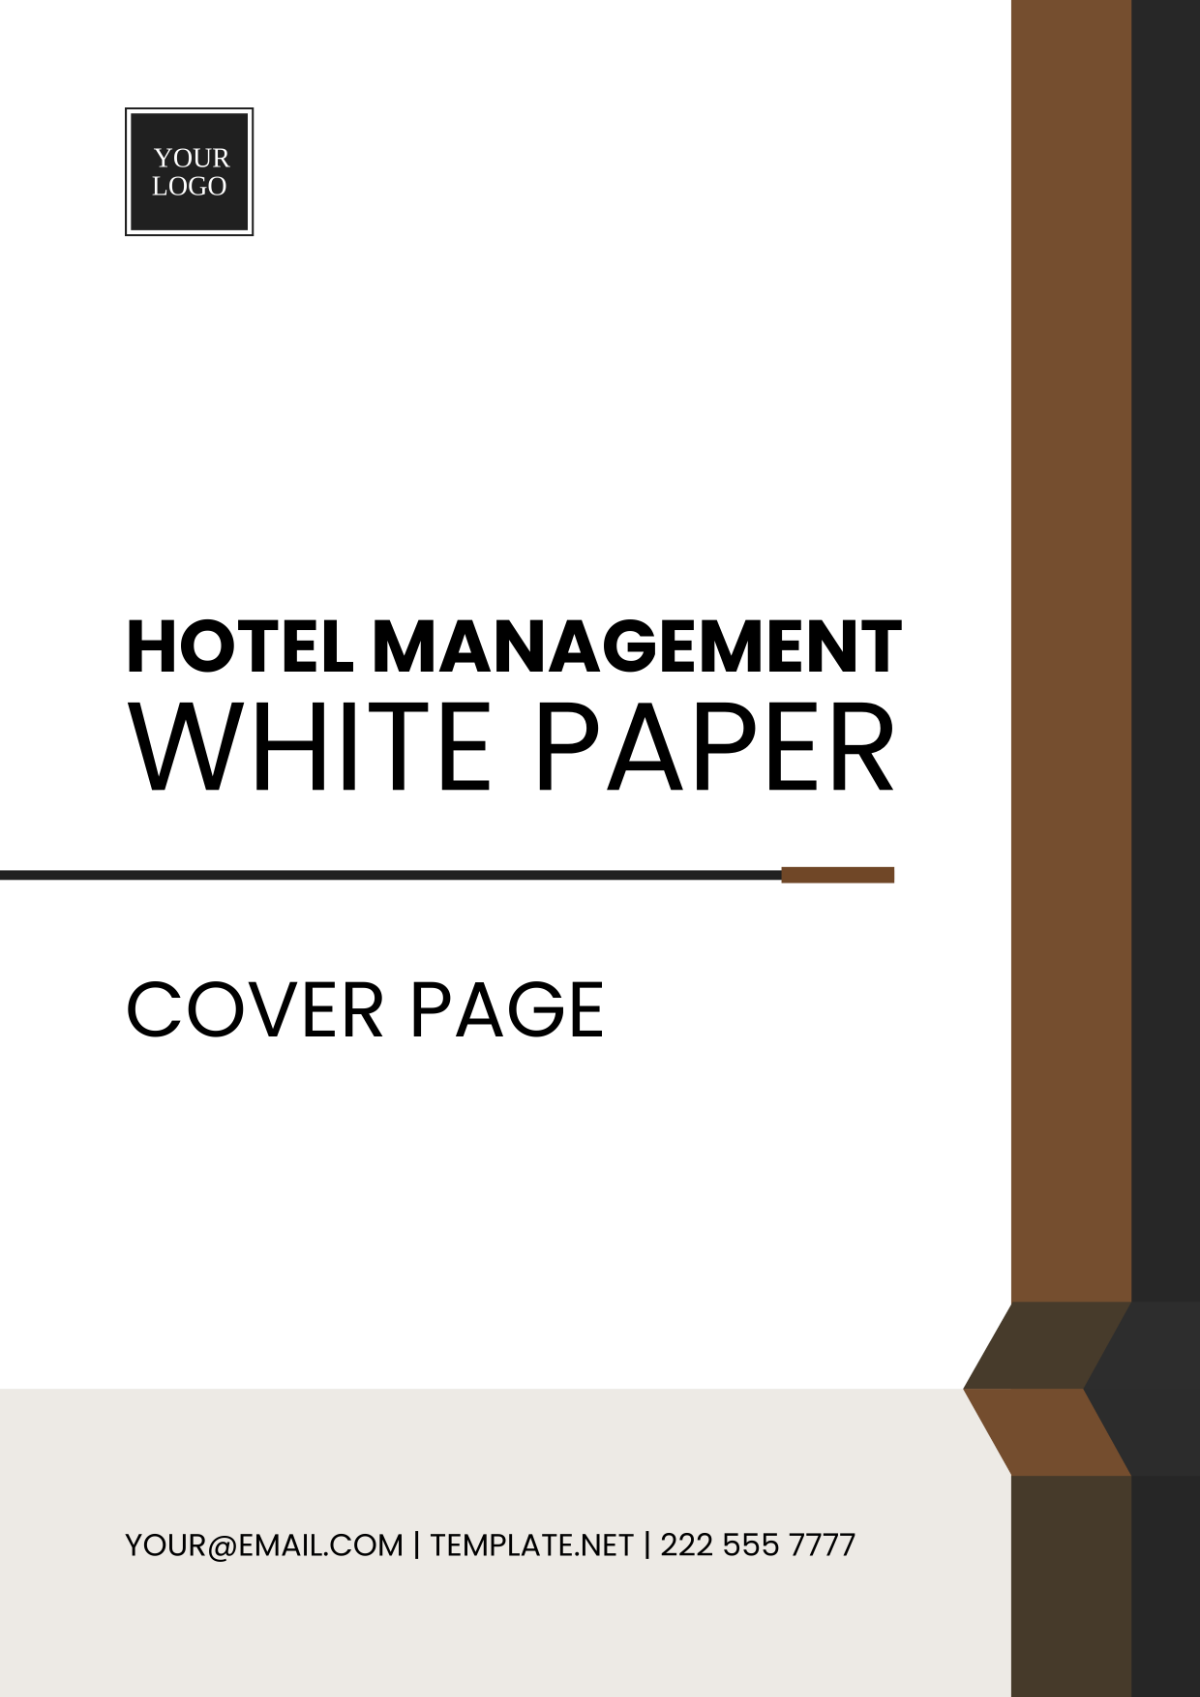 Hotel Management White Paper Cover Page